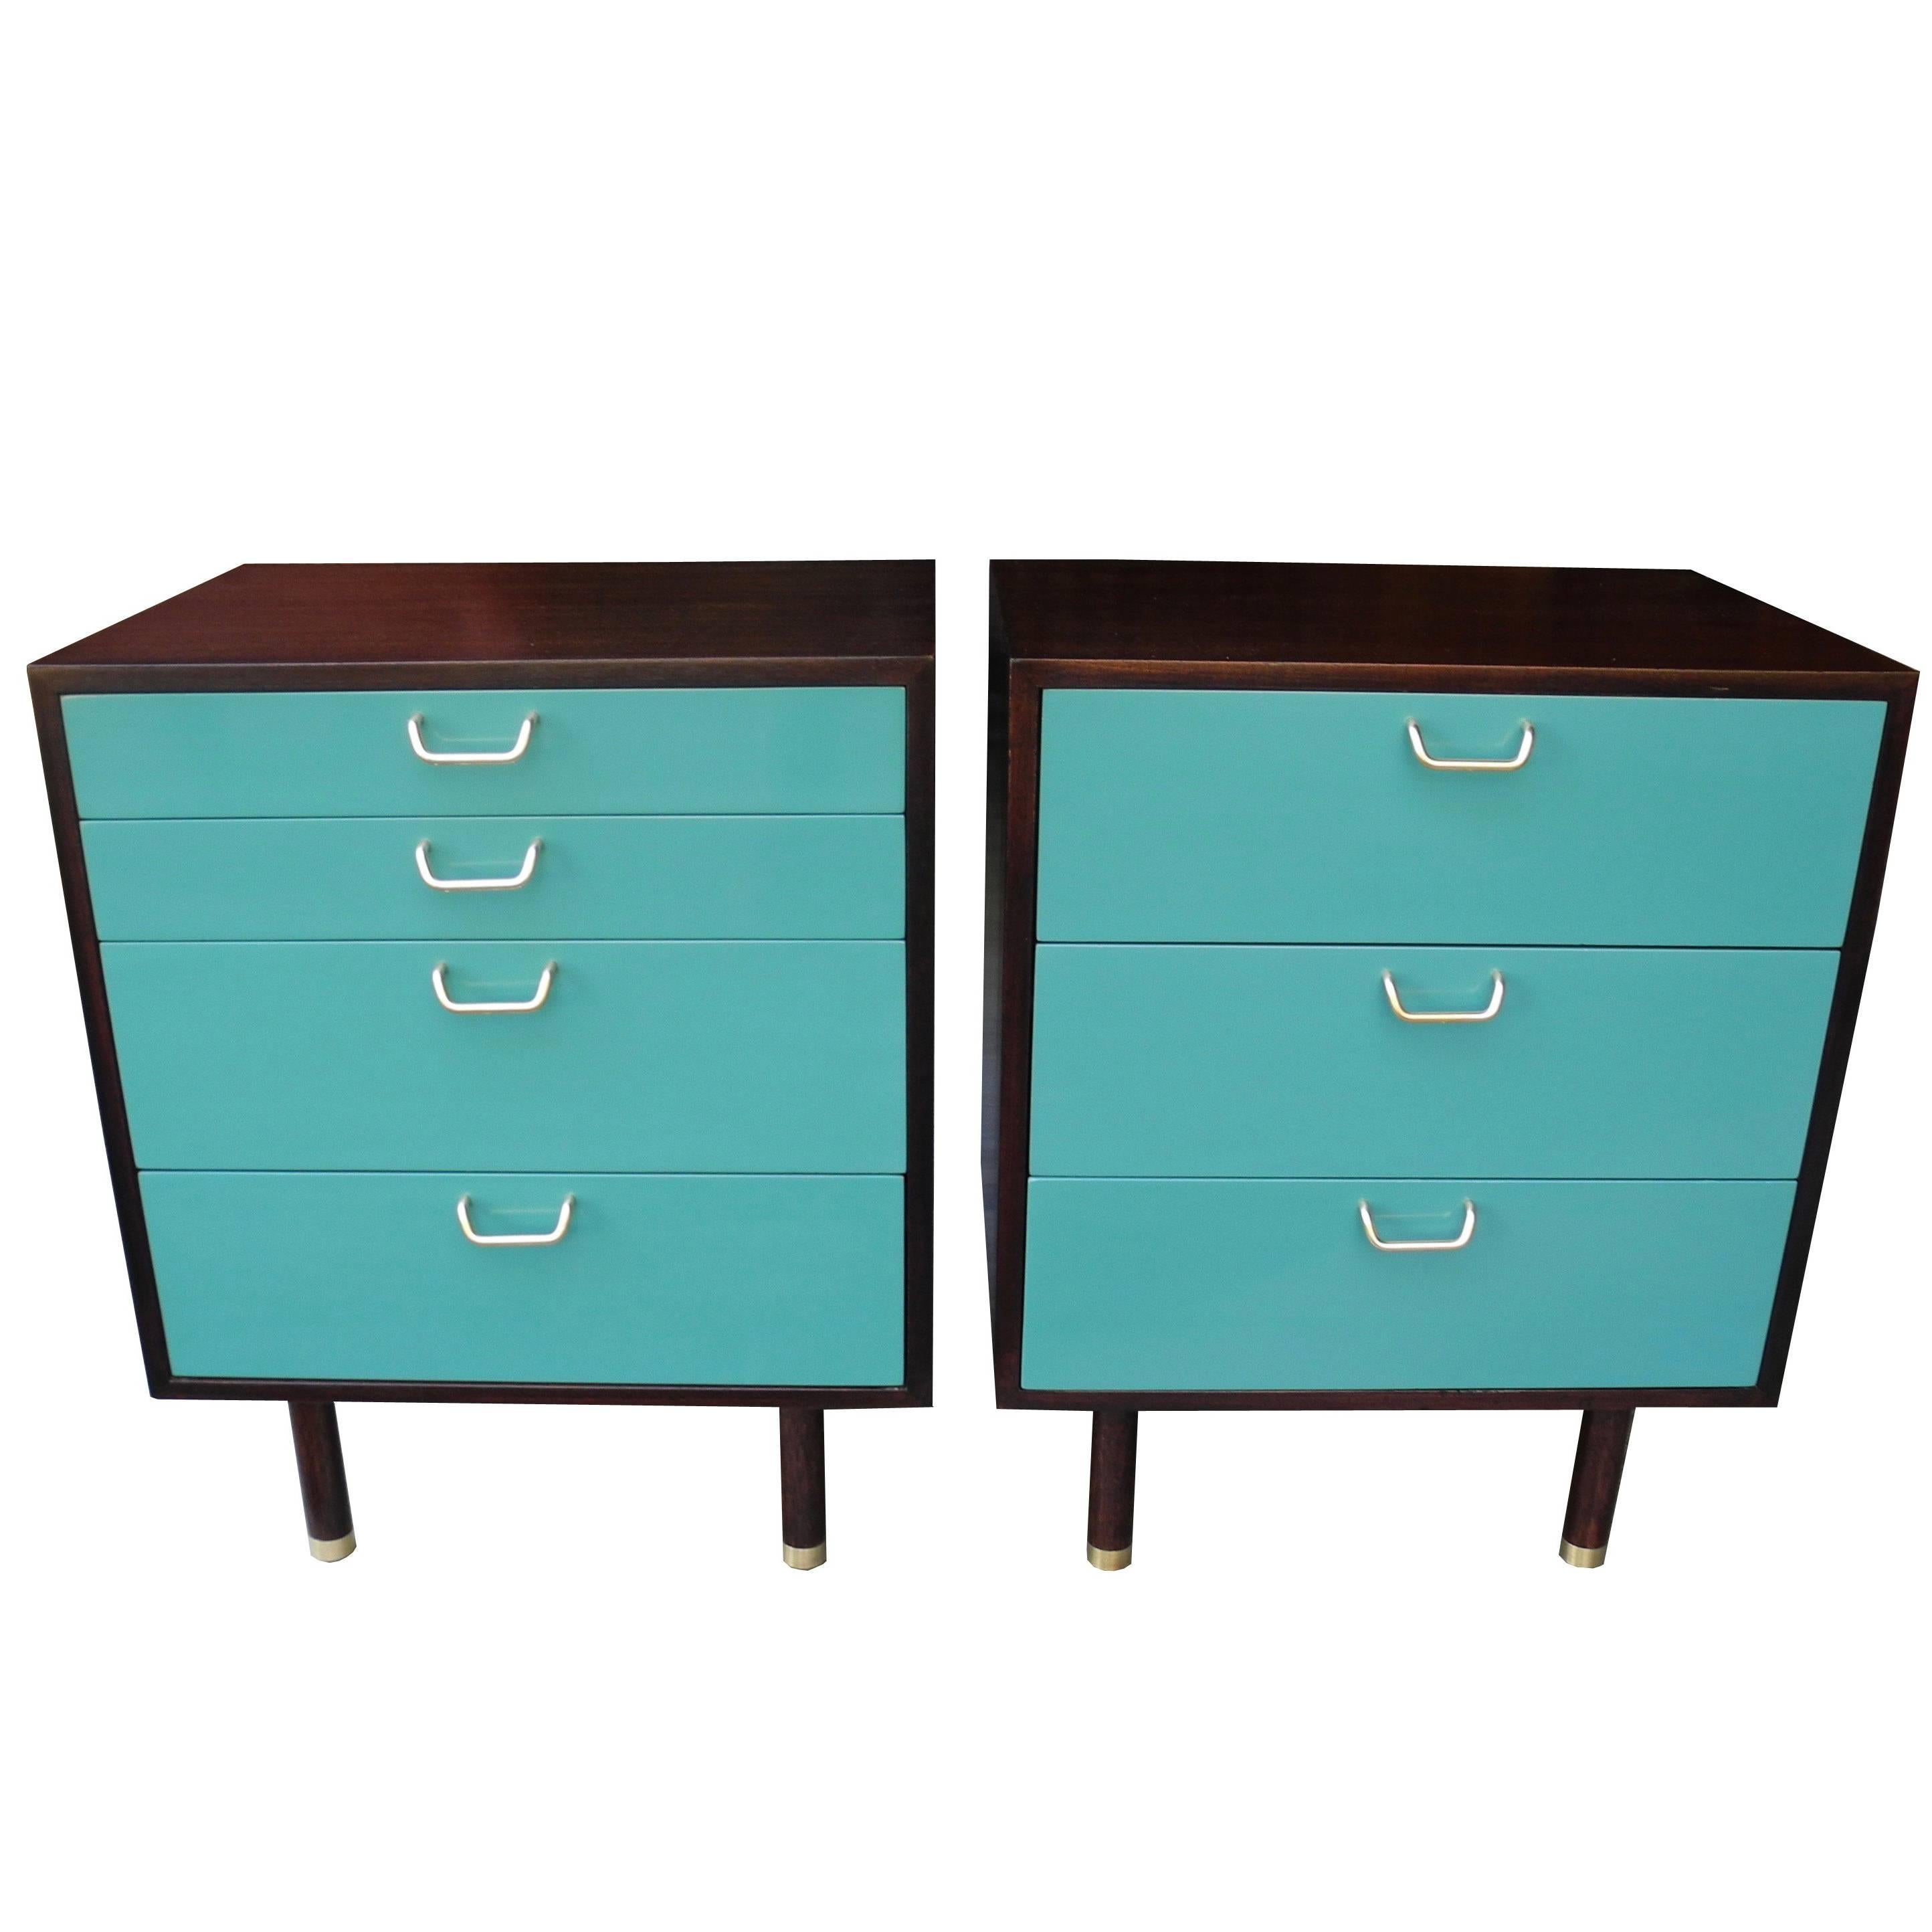 Pair of Mahogoany and Teal Color Modern Nightstands by Harvey Probber For Sale